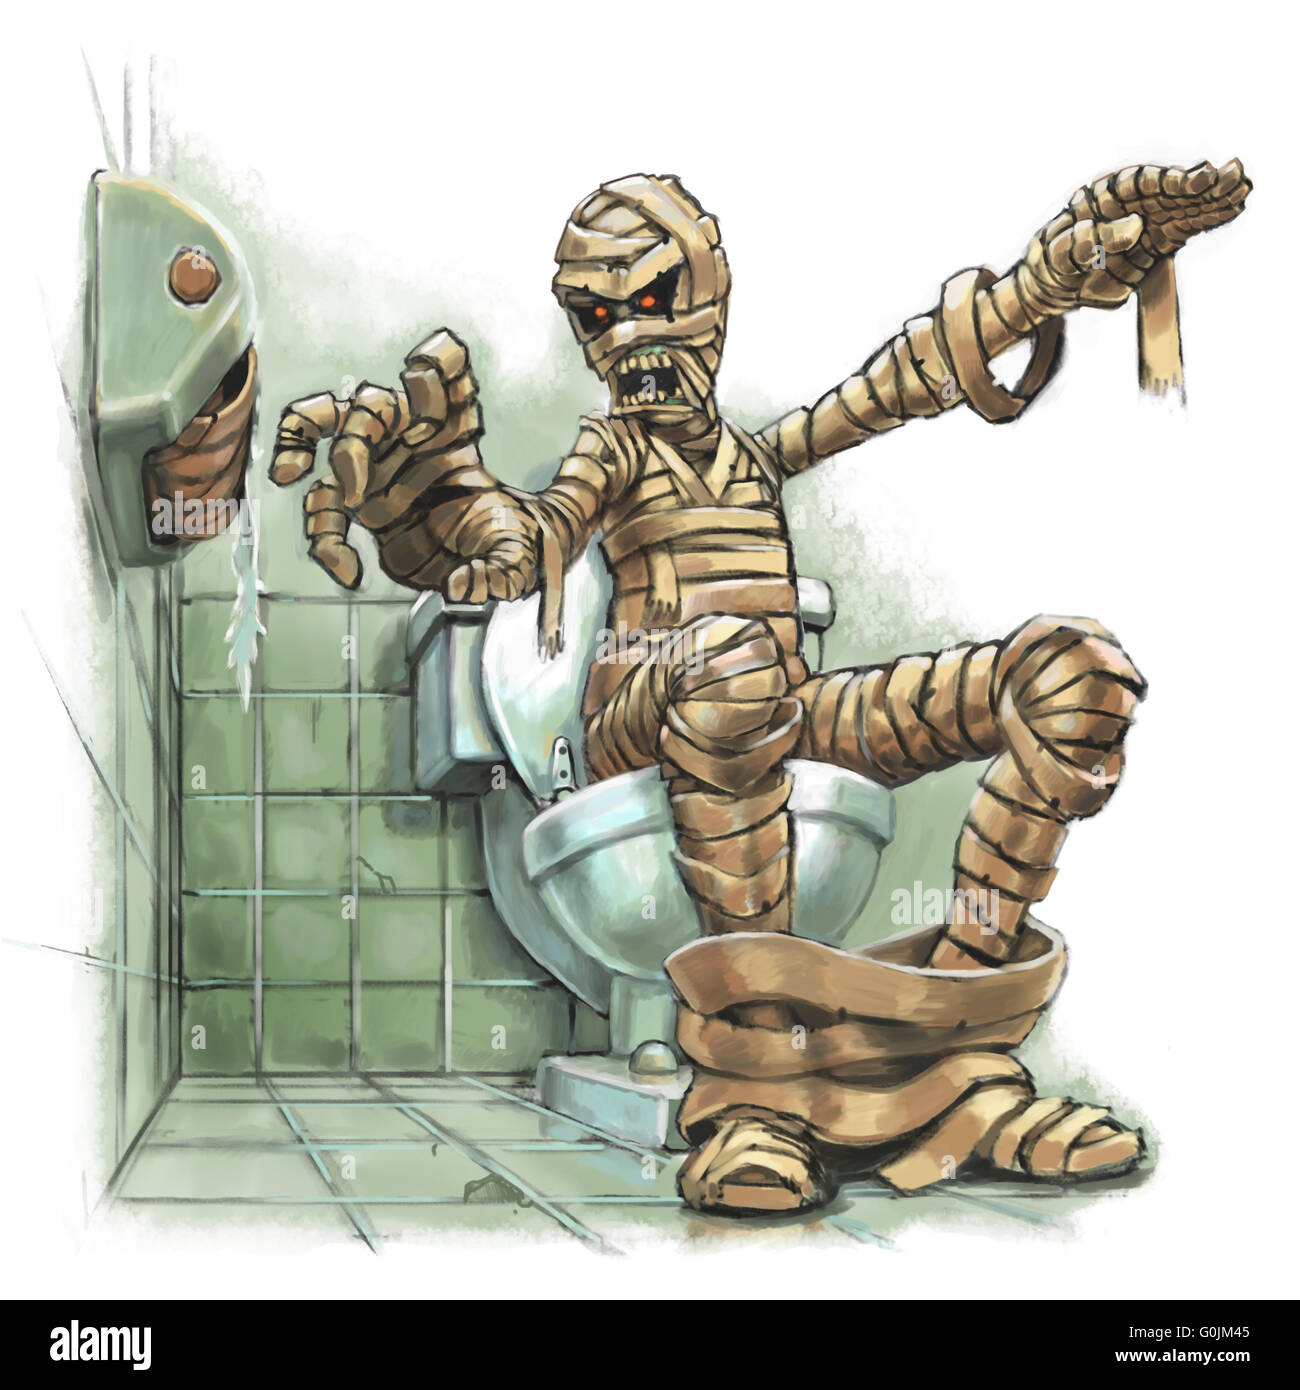 A funny cartoon illustration of a scary mummy sitting on a toilet who suddenly realizes  there is no toilet paper on the roll. Stock Photo